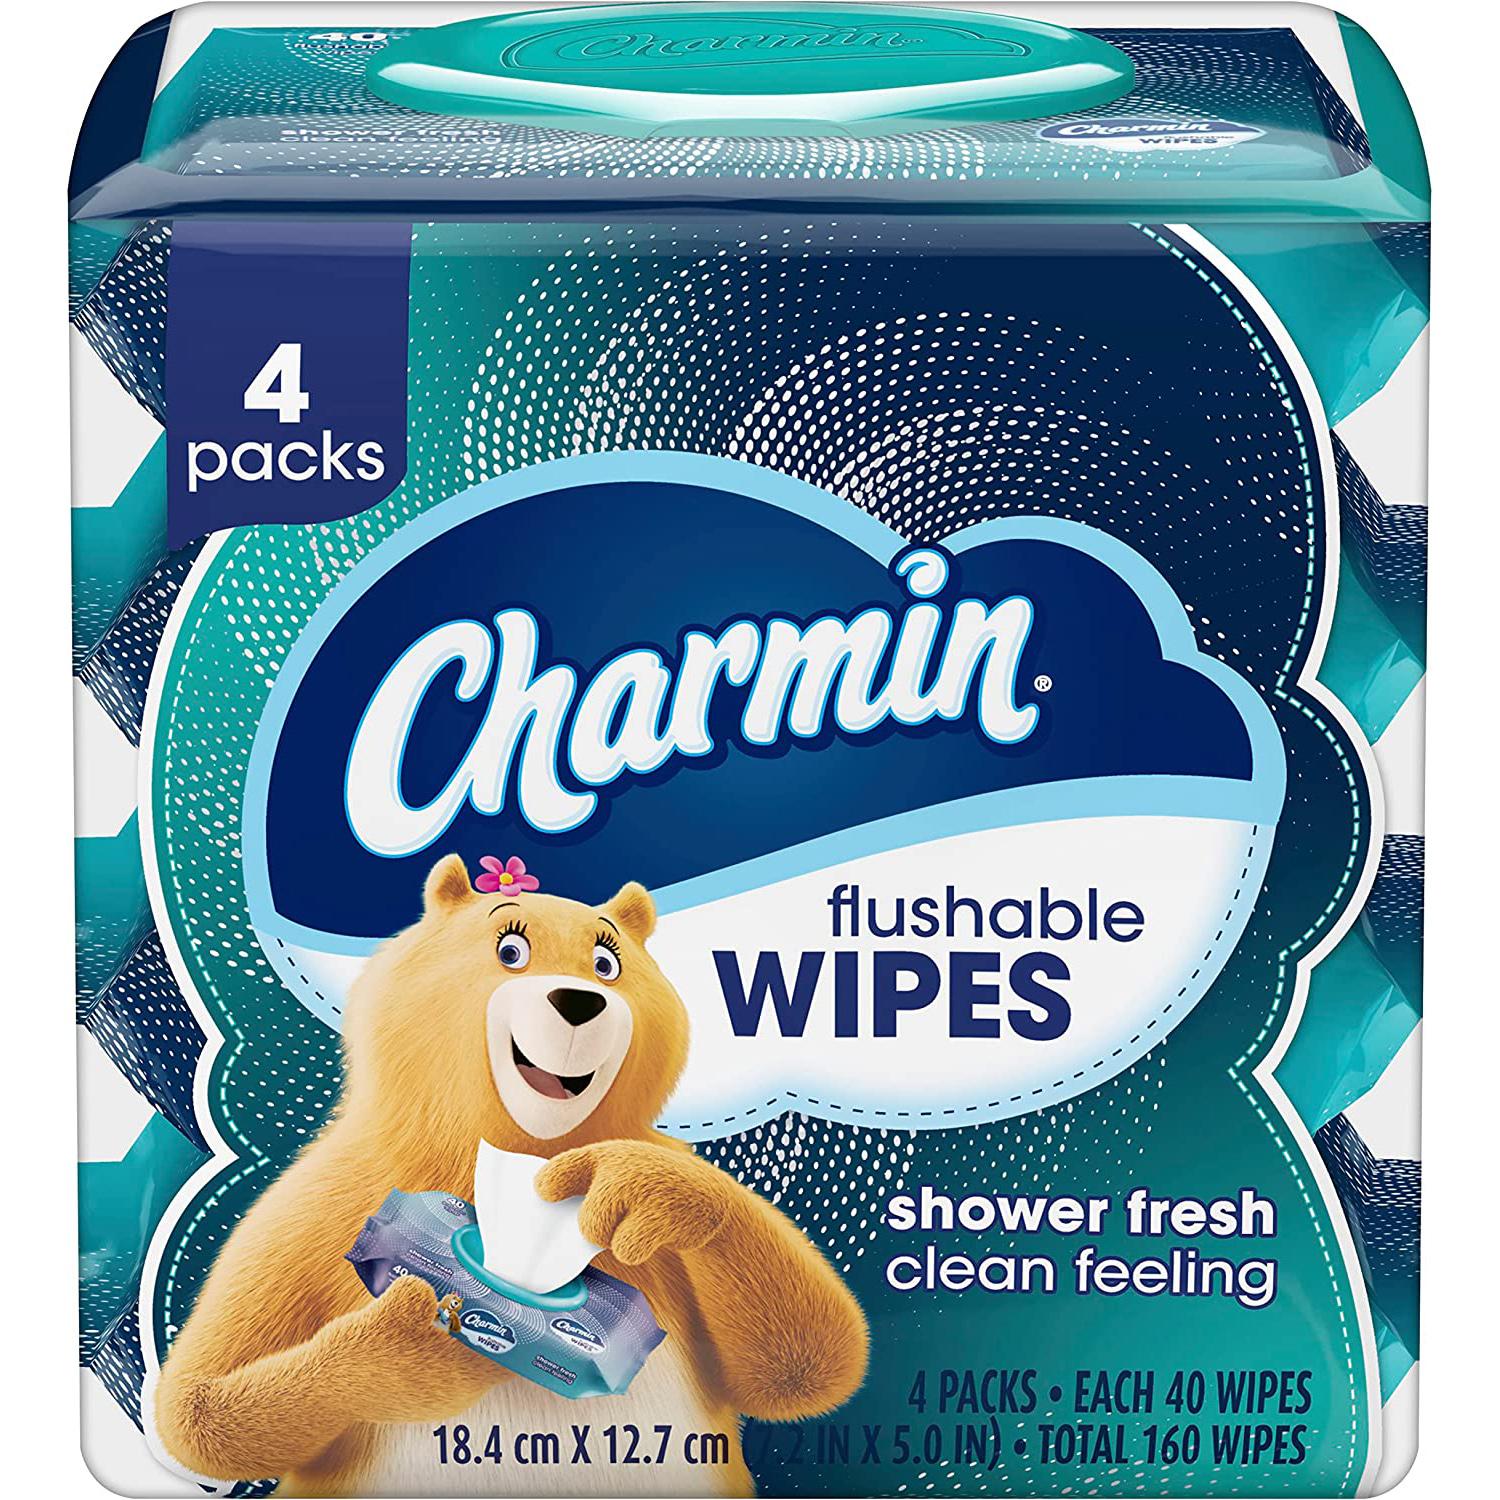 Charmin Wipes Shower Fresh 160 Wipes for $6.22 Shipped